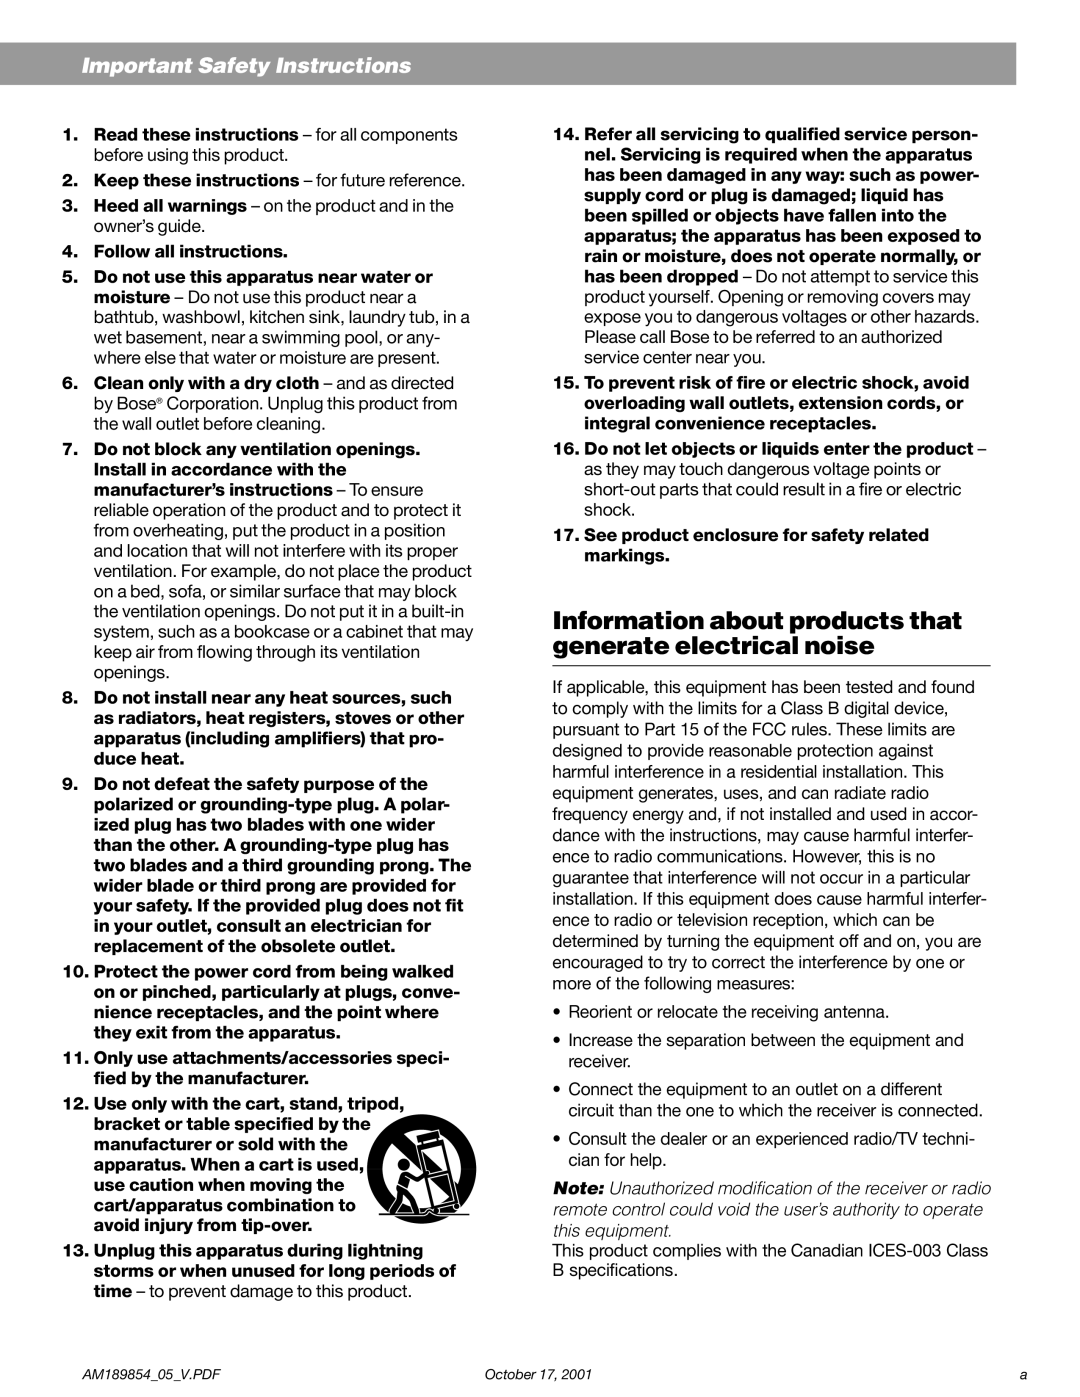 Bose 5 manual Important Safety Instructions 